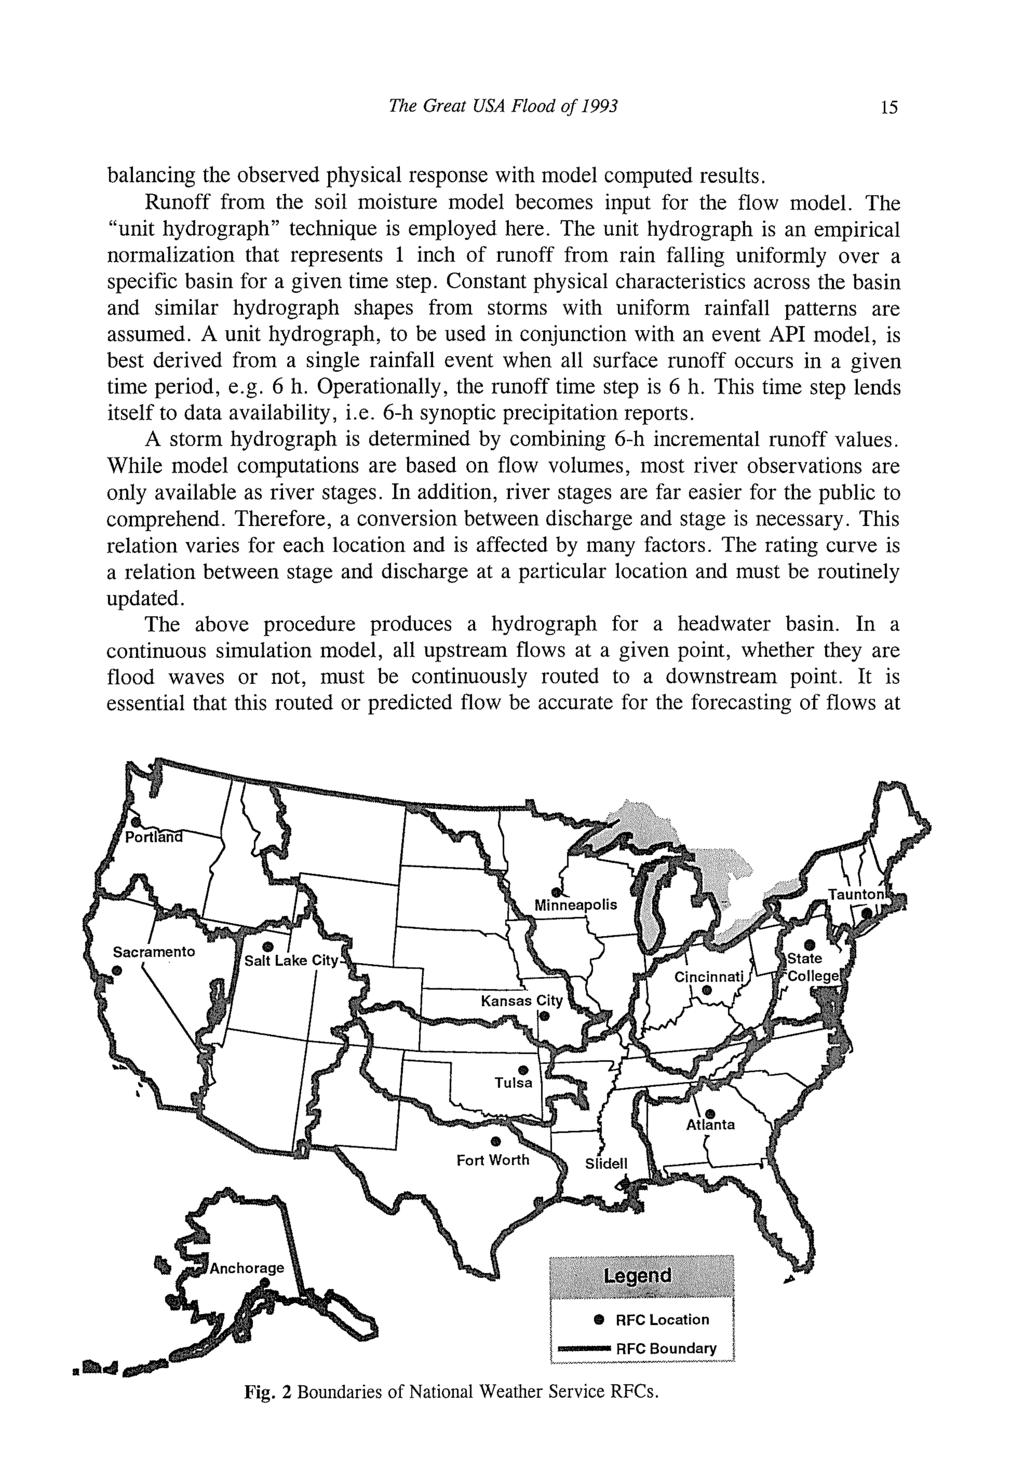 The Great USA Flood of 1993 balancing the observed physical response with model computed results. Runoff from the soil moisture model becomes input for the flow model.